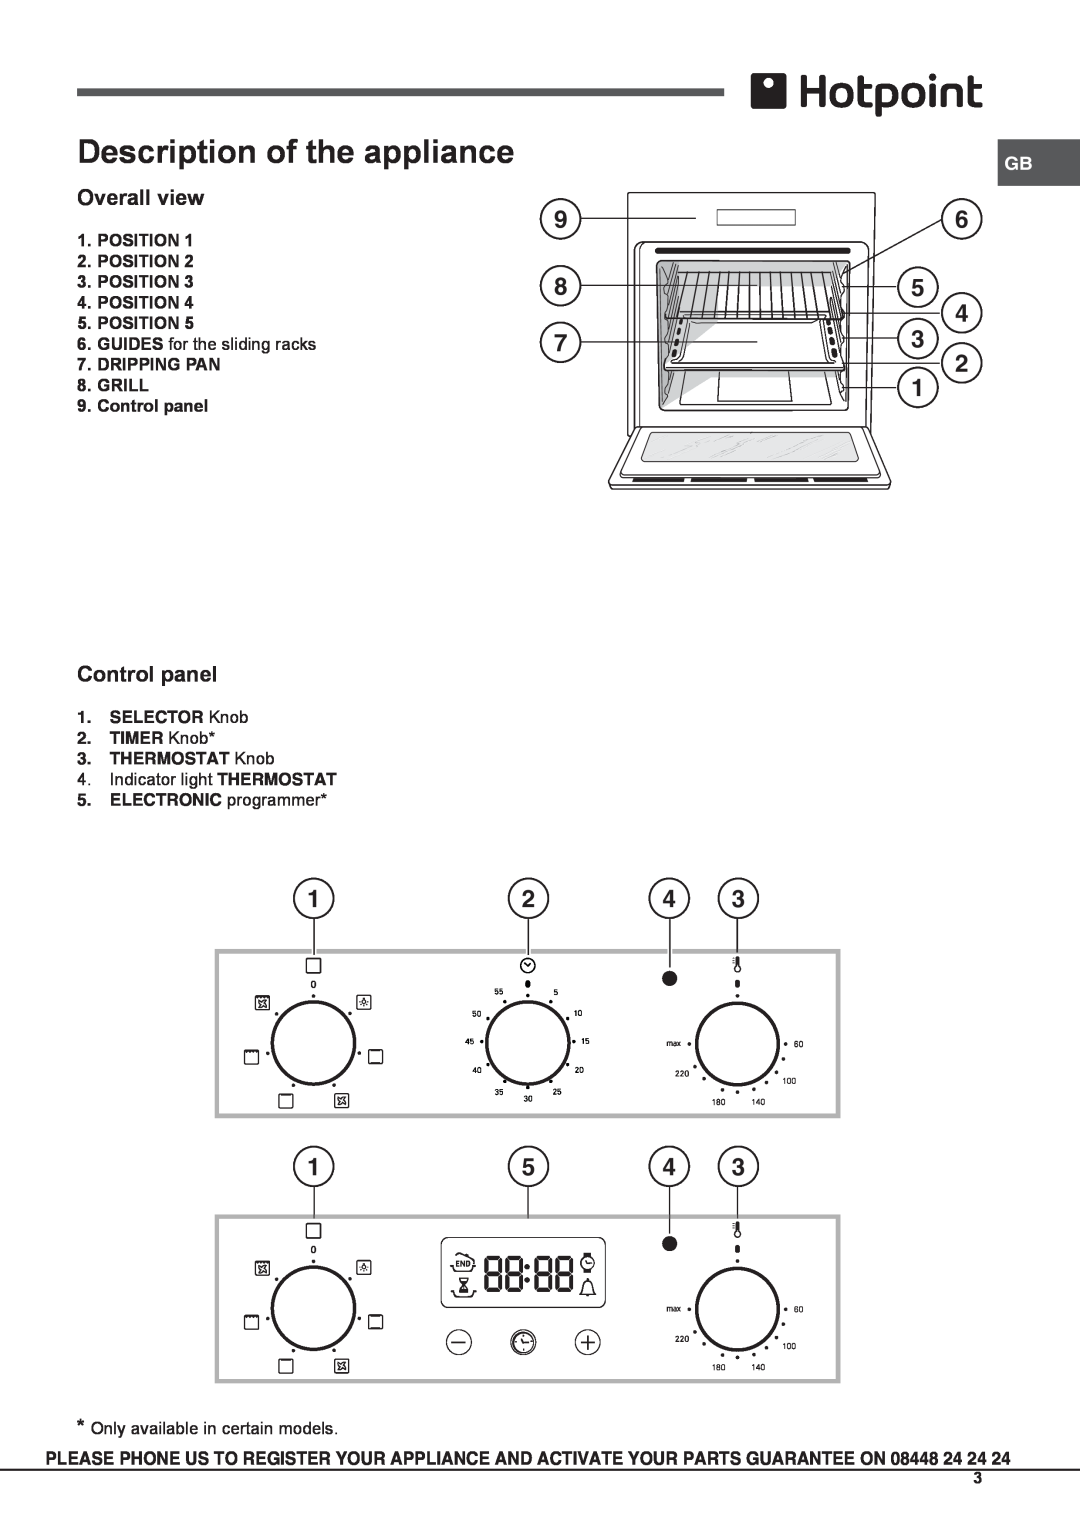 Hotpoint SHS53X S Description of the appliance, Overall view, Control panel, Position, GUIDES for the sliding racks, Grill 